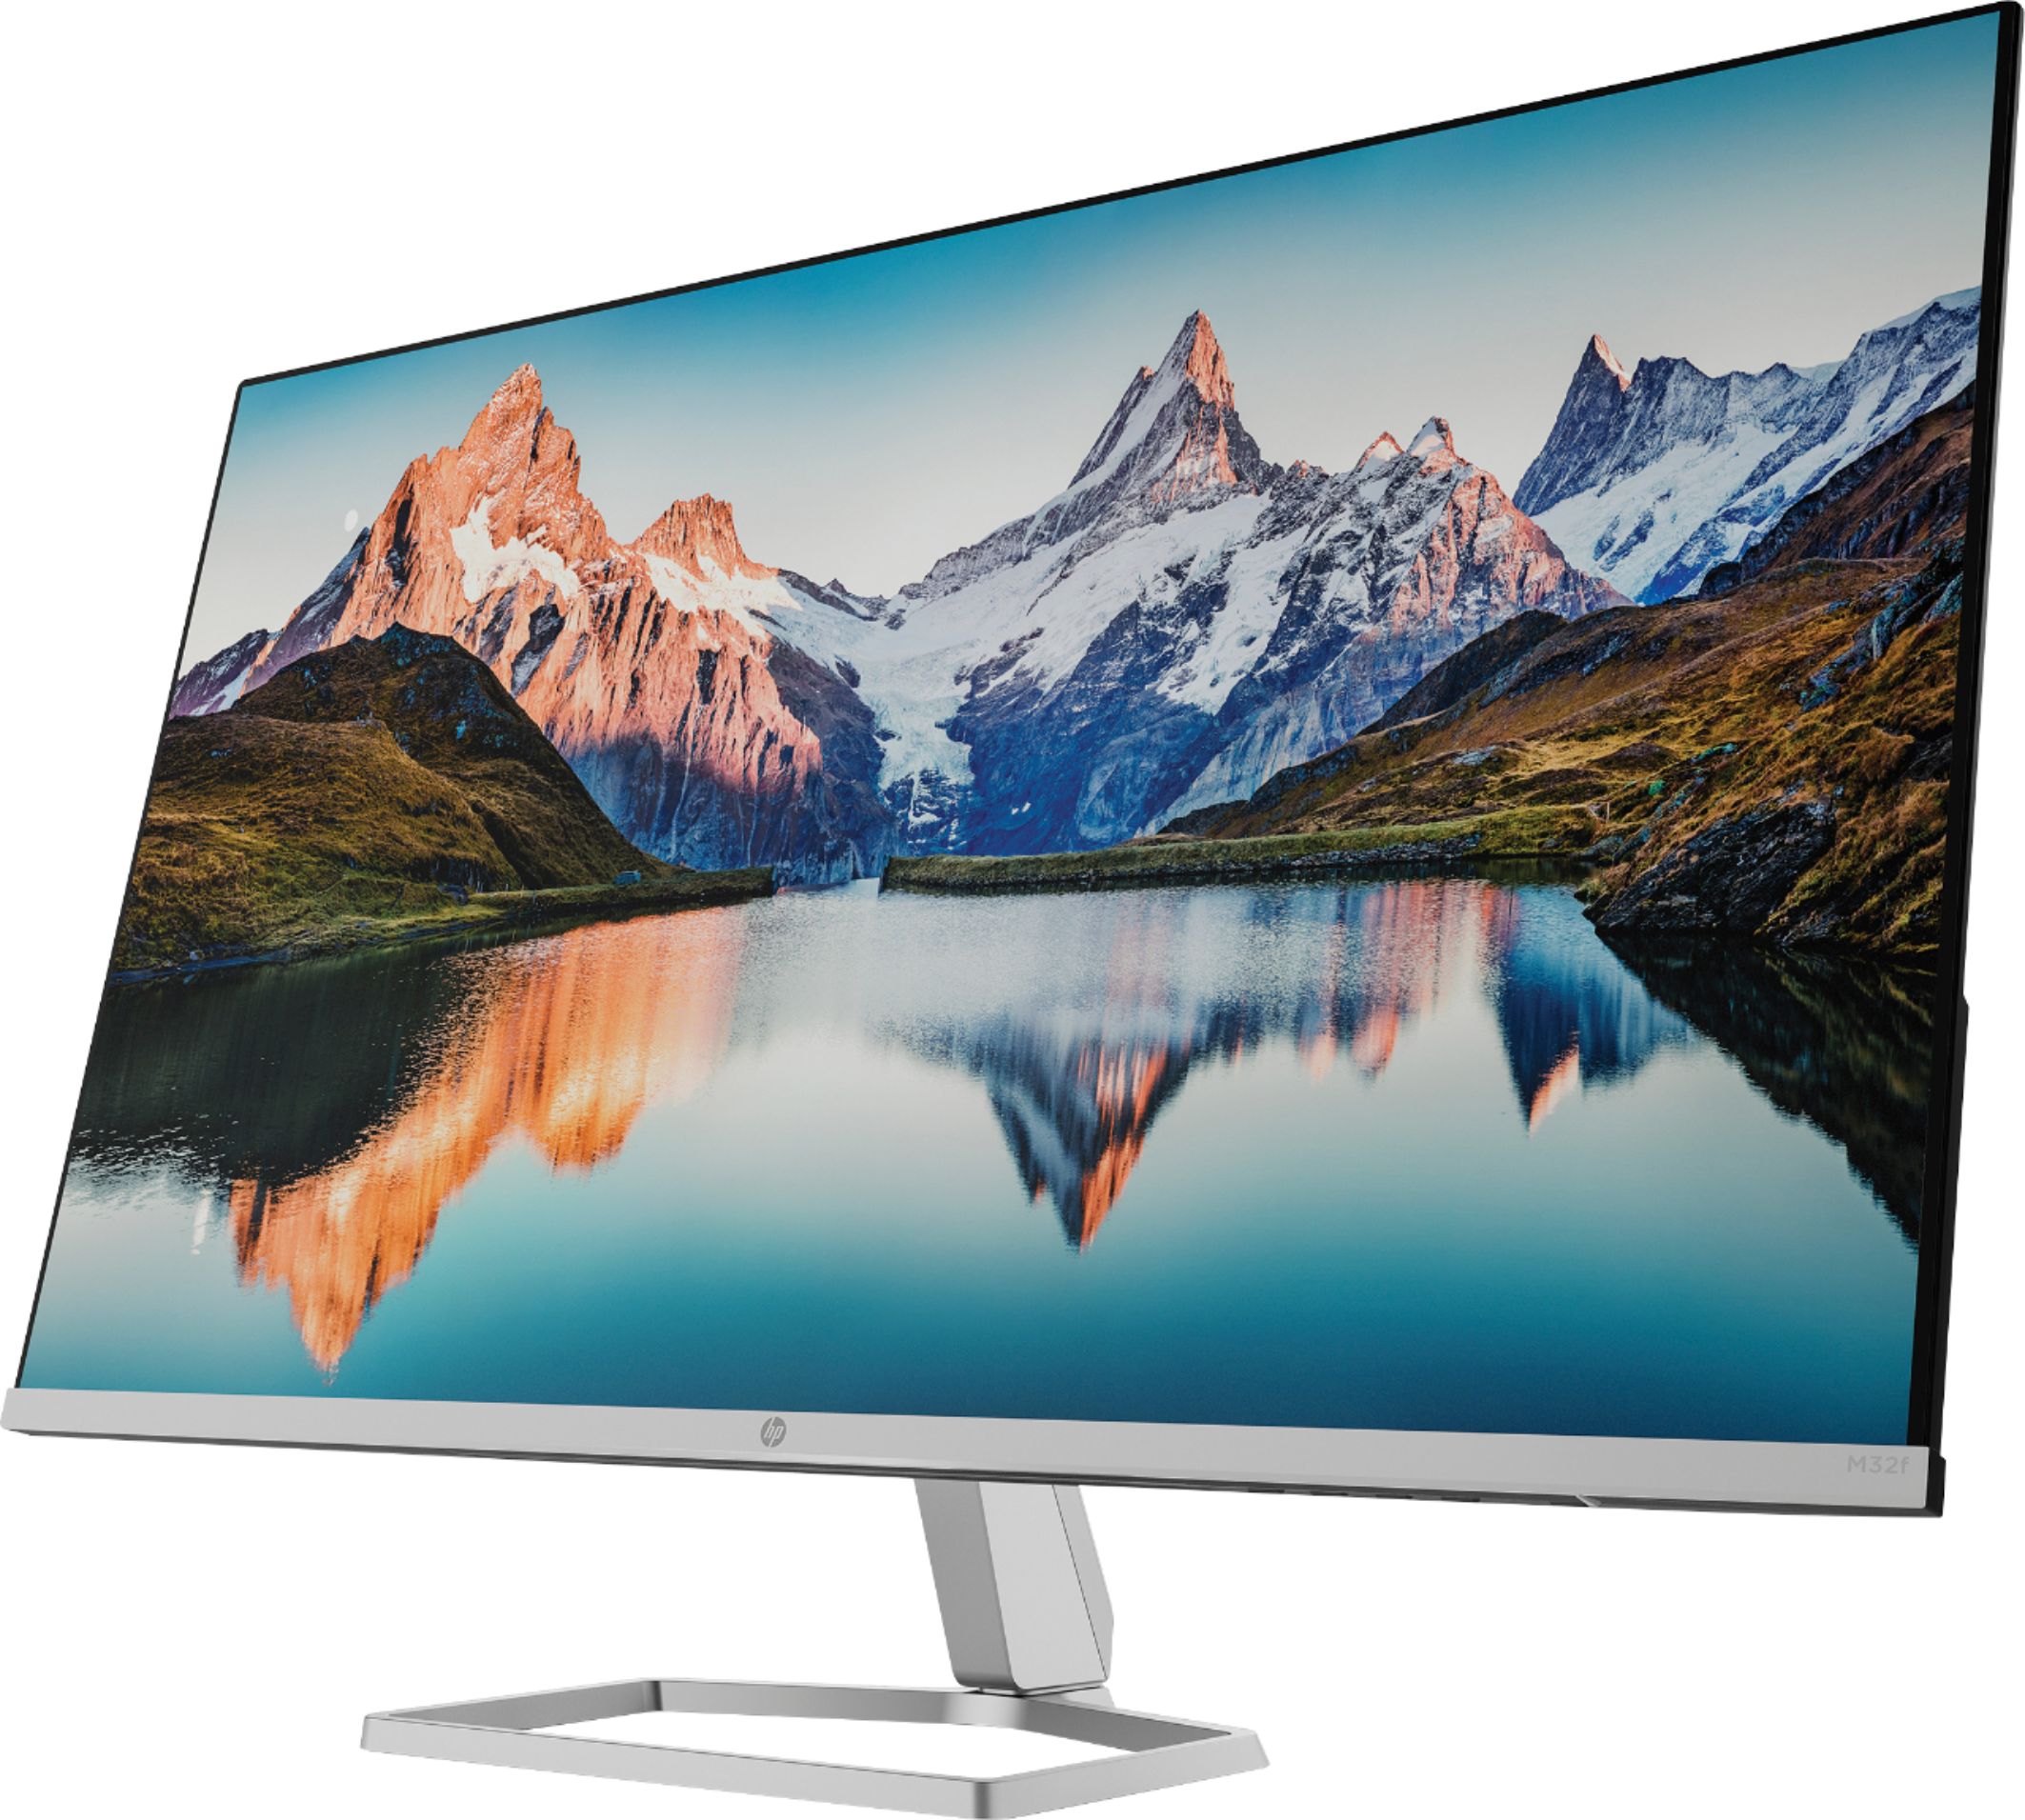 Angle View: Samsung - A700 Series 32" LED 4K UHD Monitor with HDR - Black